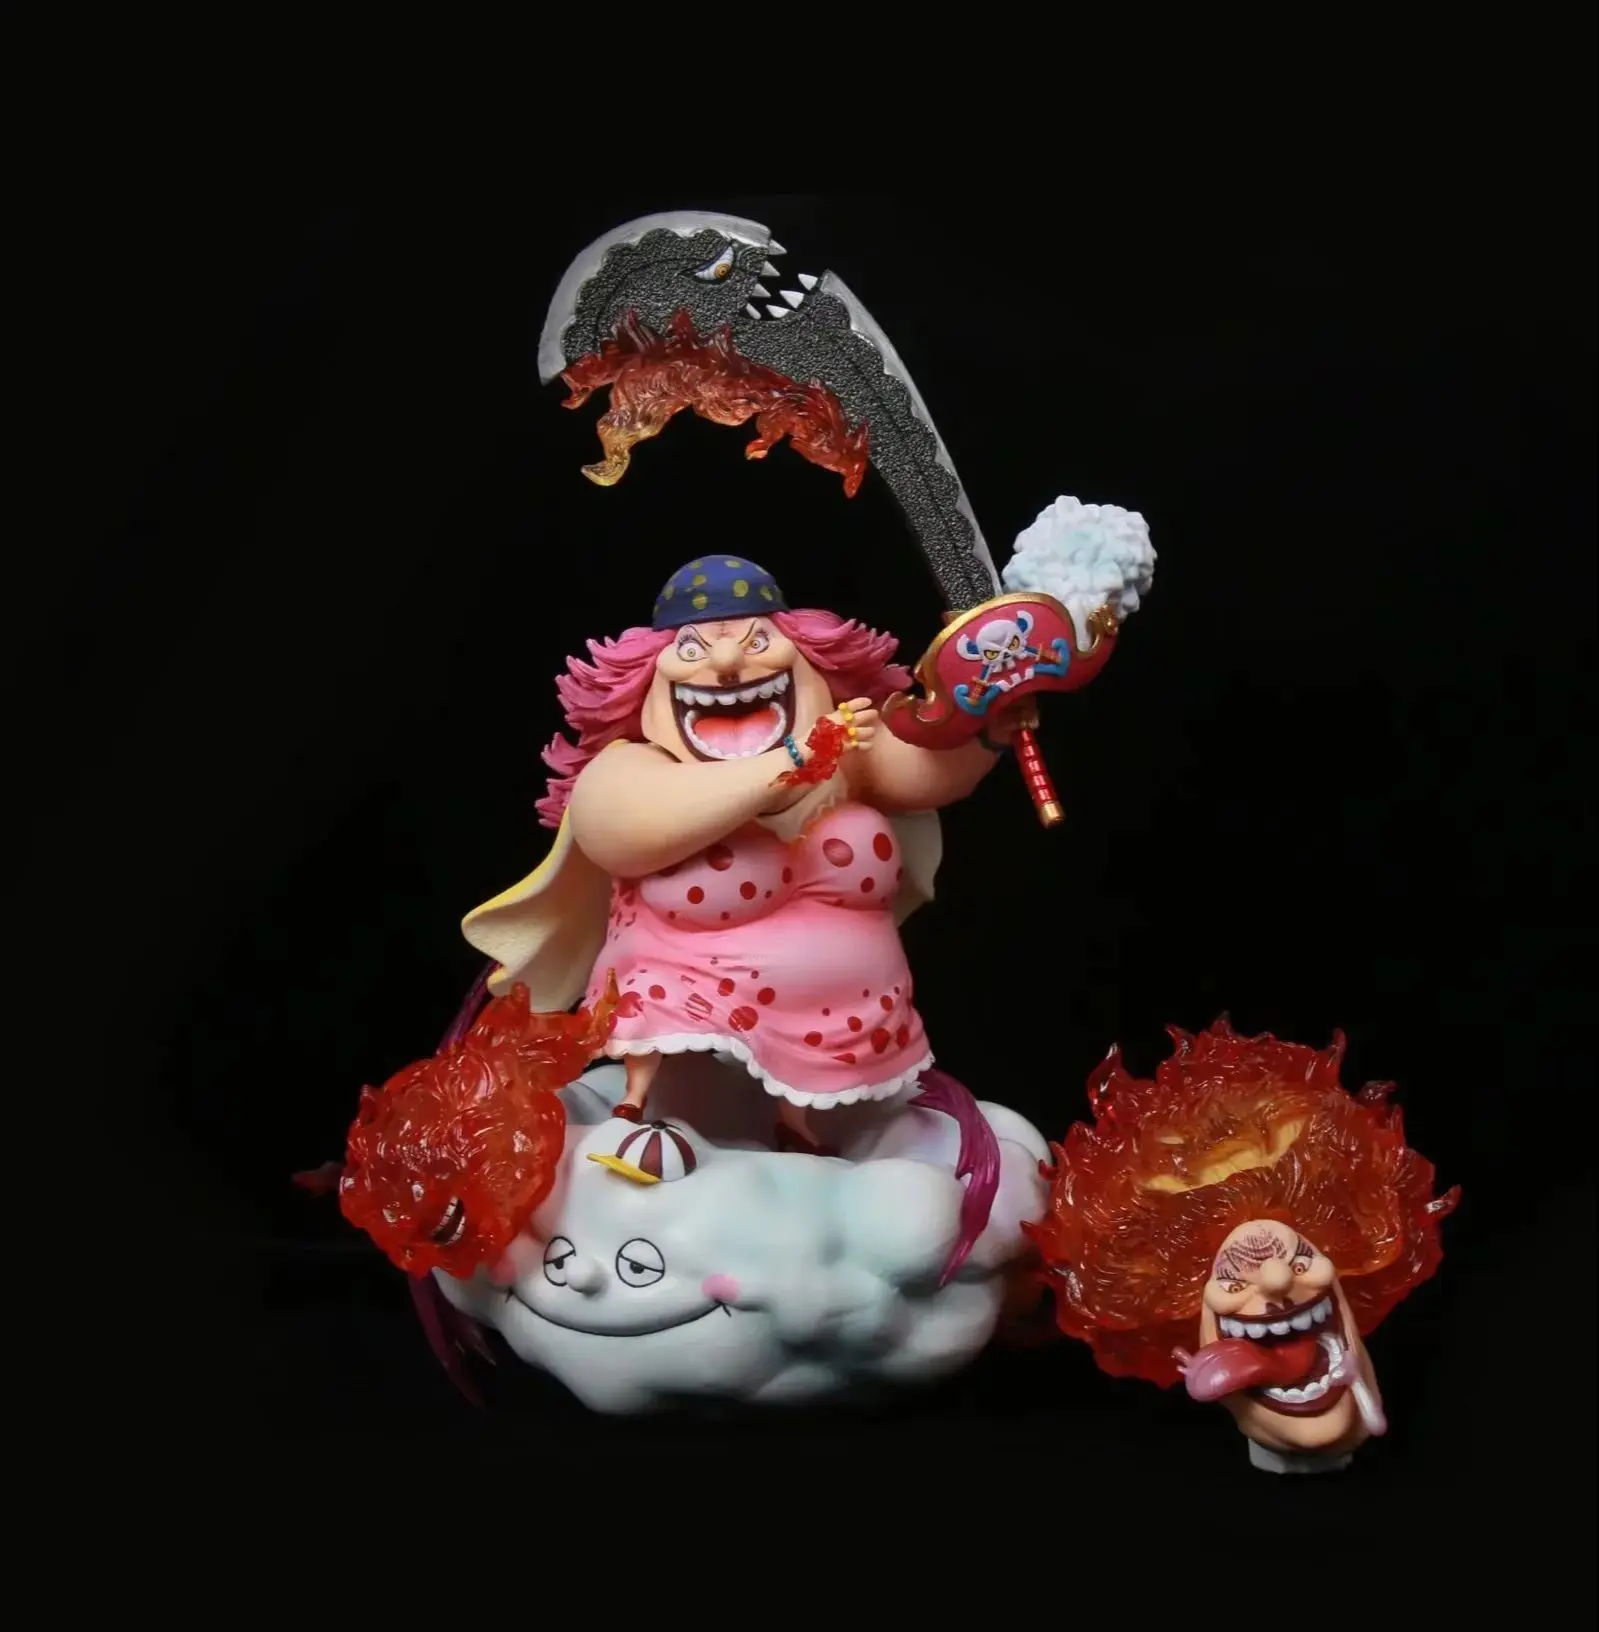 

Anime One Piece Four Emperors Pirates Big Mom Charlotte Linlin Battle Ver. GK PVC Action Figure Statue Collection Model Toy Doll